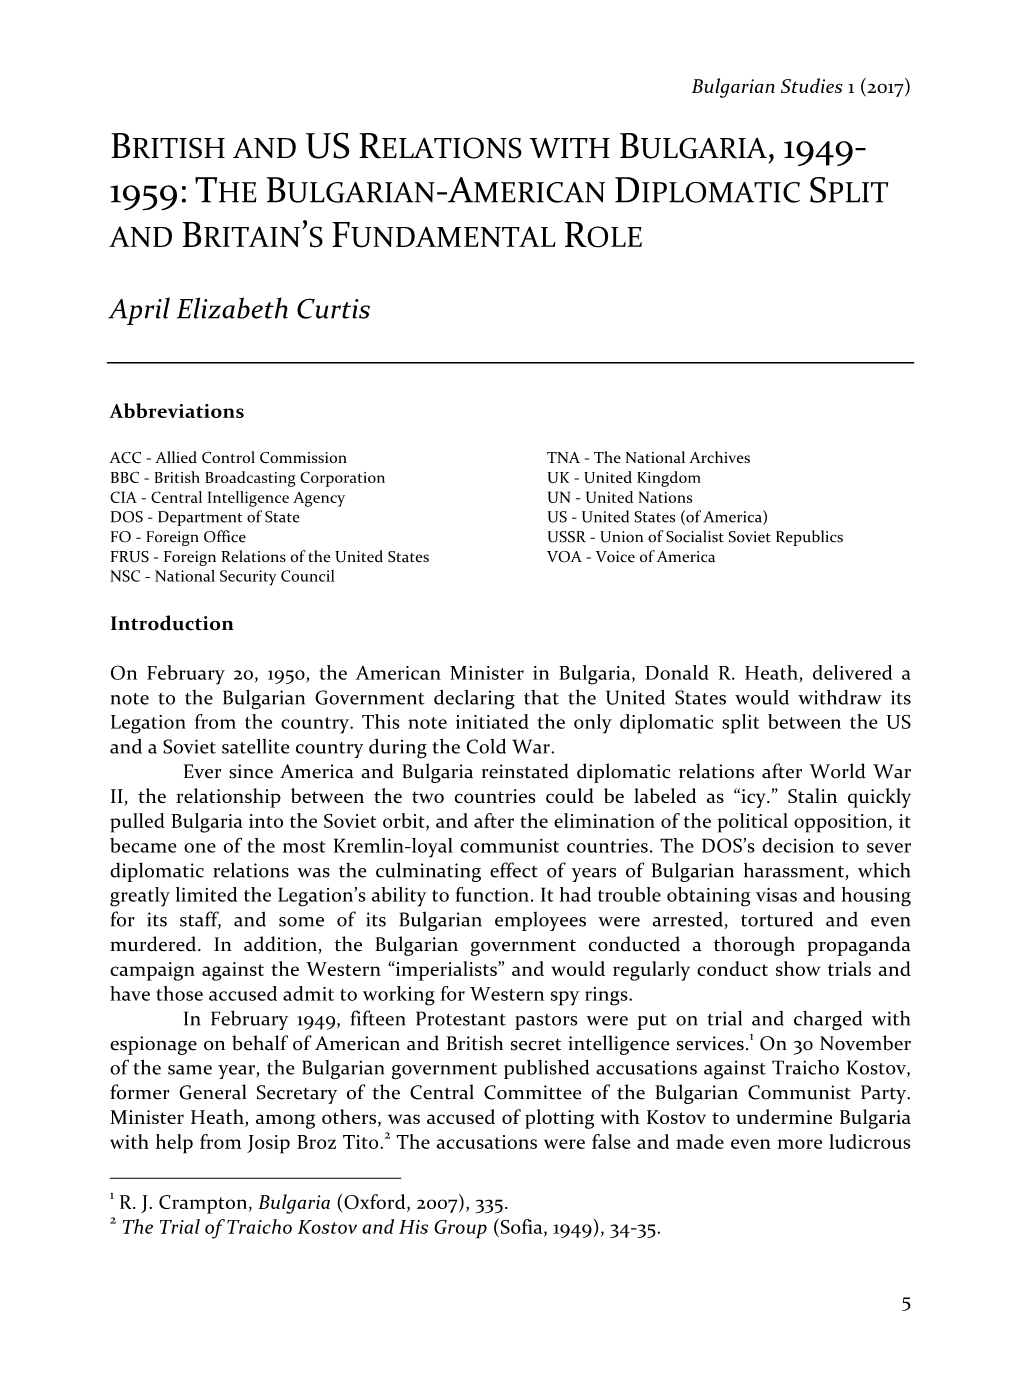 British and Us Relations with Bulgaria, 1949- 1959: the Bulgarian-American Diplomatic Split and Britain's Fundamental Role